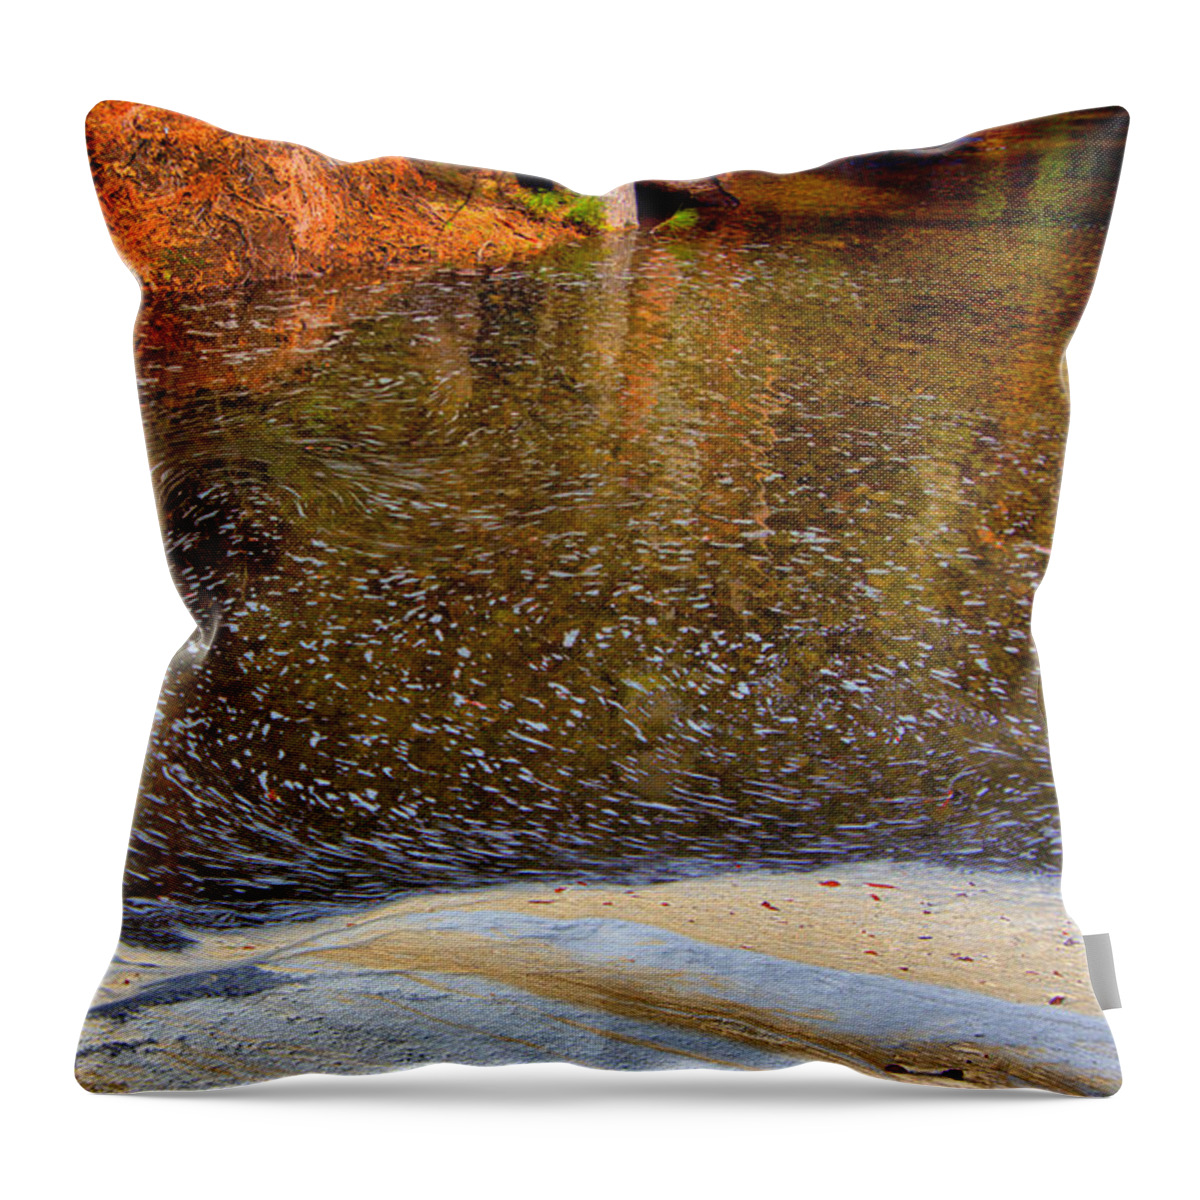 Celestial Throw Pillow featuring the photograph Celestial Water by Josephine Buschman